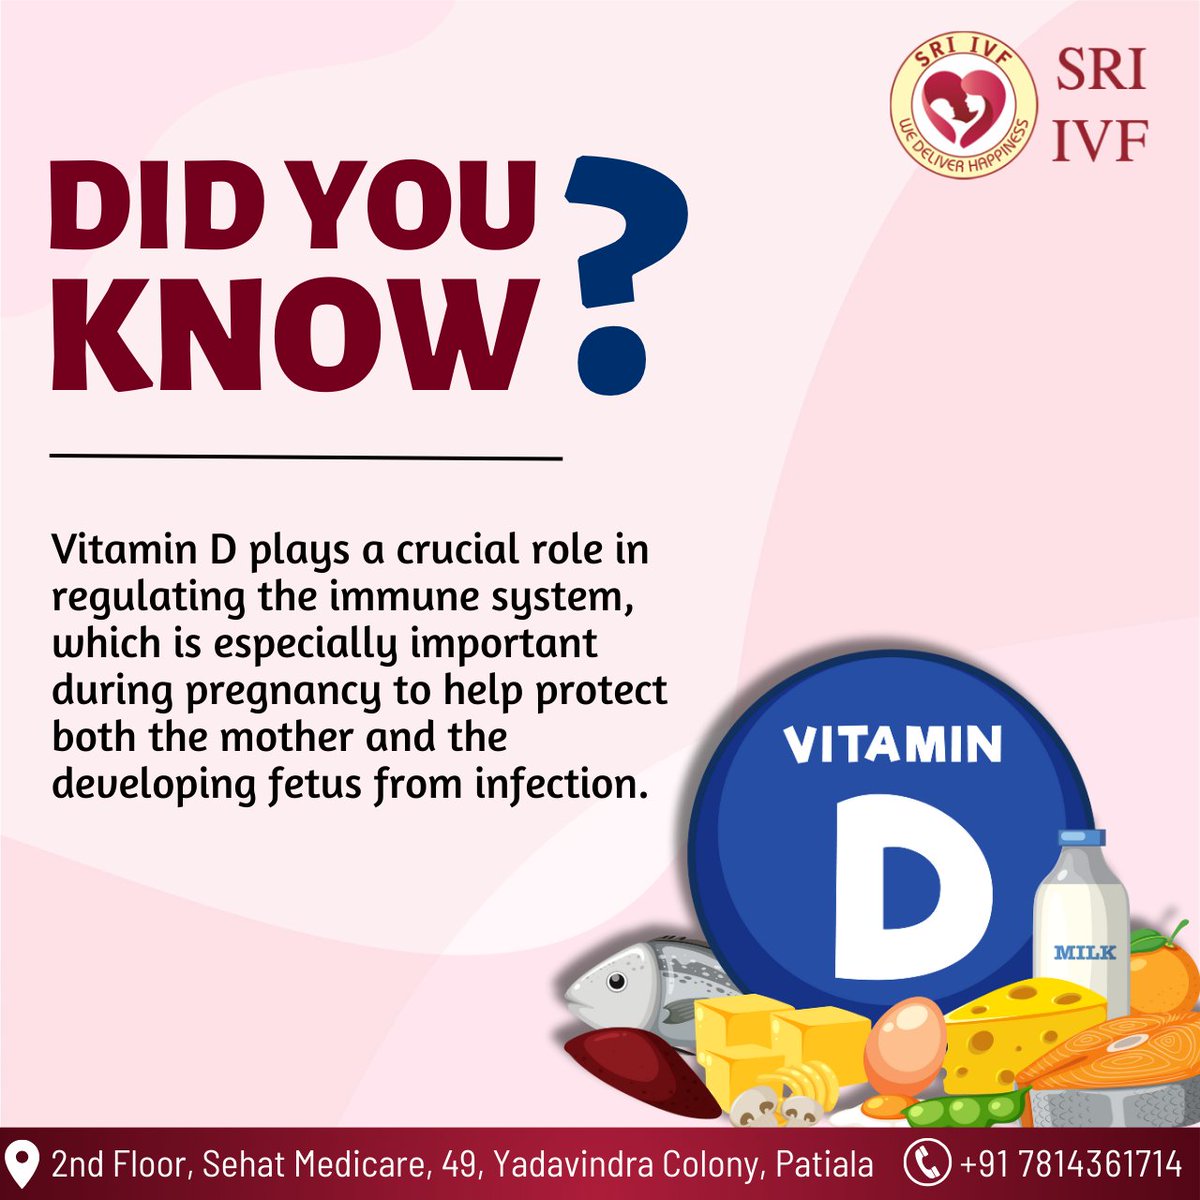 Did you know? Vitamin D is essential for a healthy immune system, crucial during pregnancy to protect both mother and fetus from infections.

#VitaminD #PregnancyHealth #HealthyPregnancy
#PrenatalHealth #HealthyMom #HealthTips #PregnancyHealth #sriivf #patiala #punjab